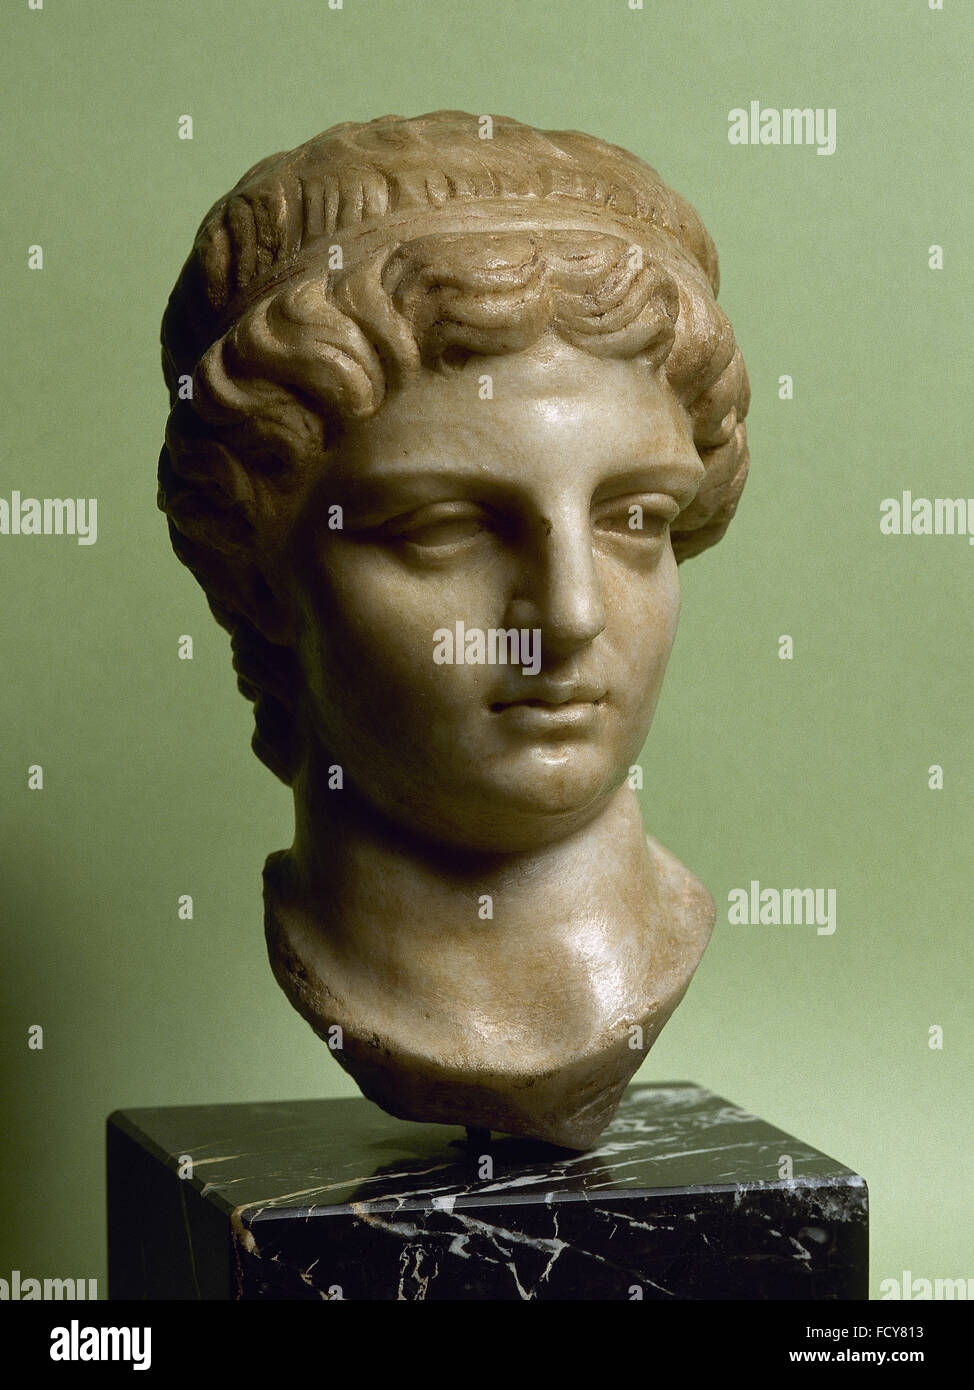 Roman Woman Bust by A. Giannelli - Busts/Heads - Sculpture/Statuary